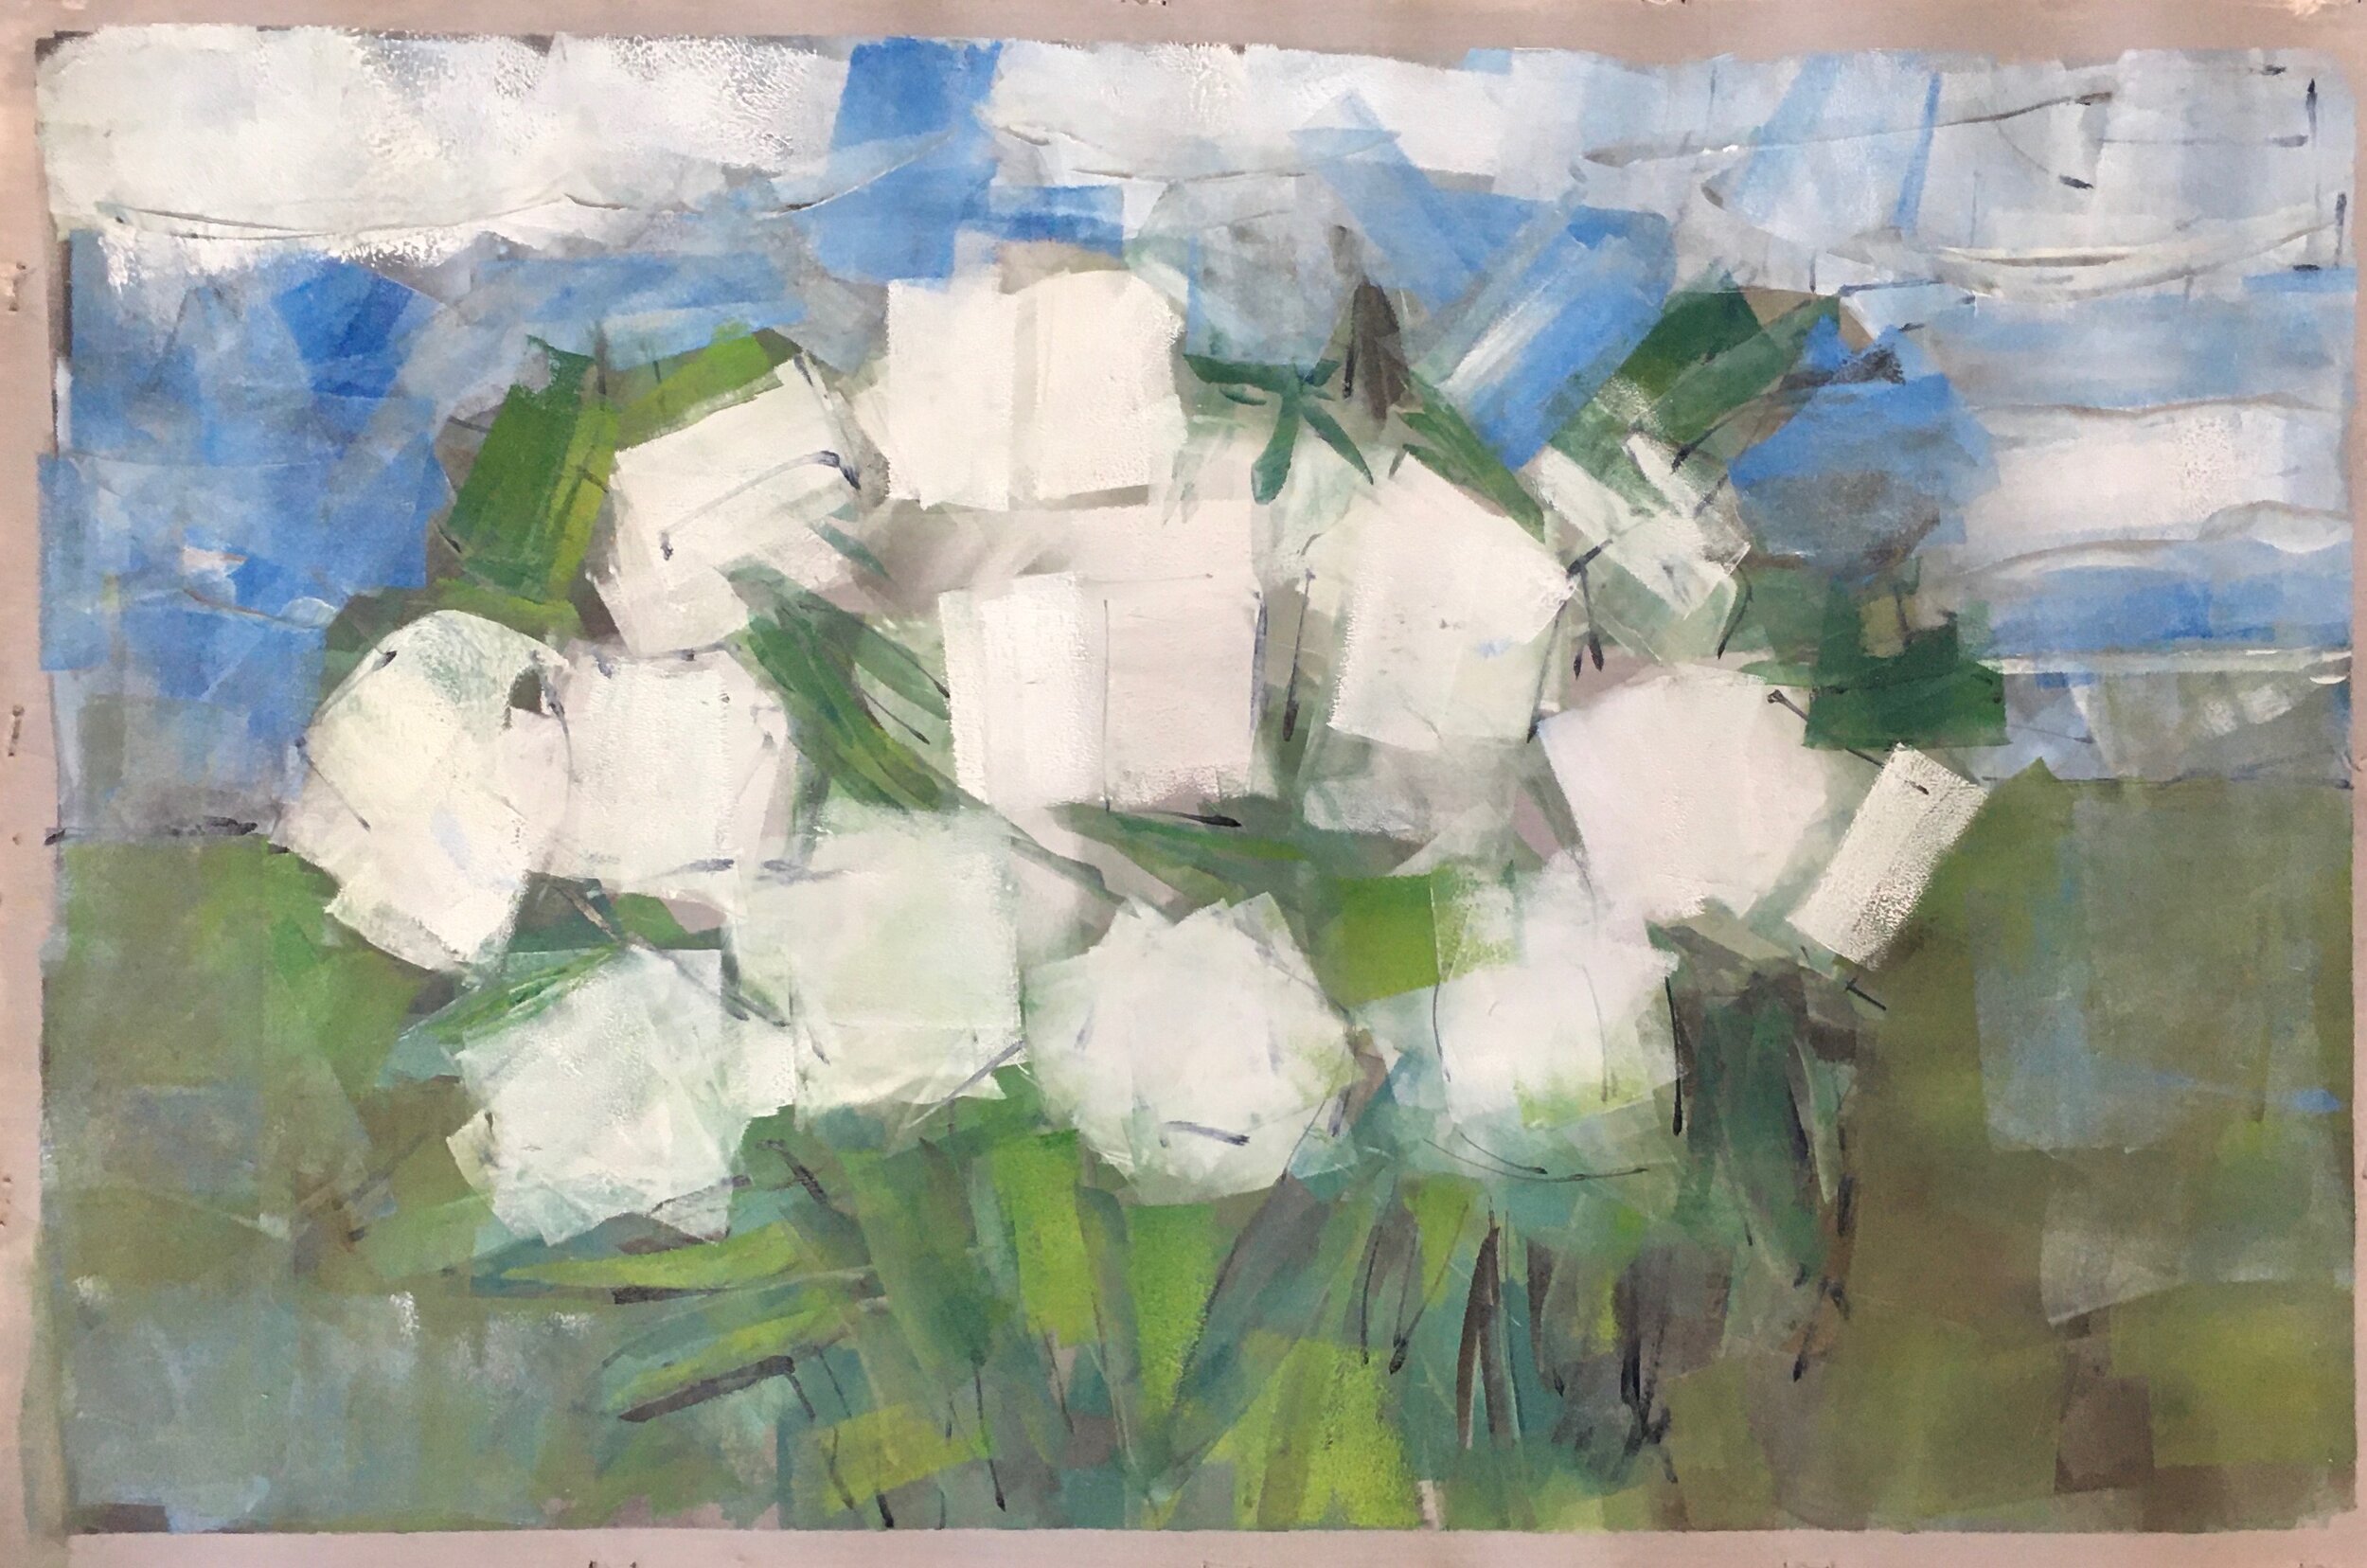 Peonies, Oil on Paper, 22 by 15 inches, 2018.